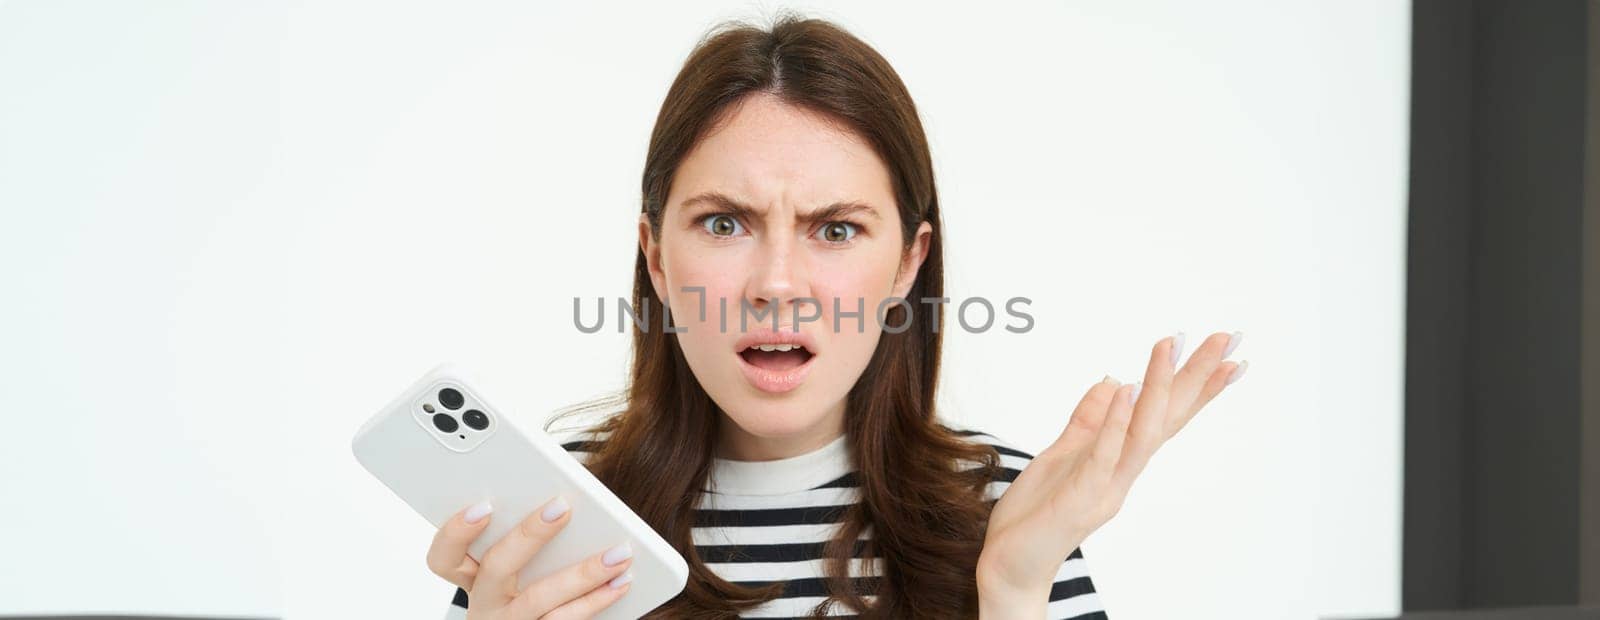 Portrait of angry, confused young woman shrugging shoulders while using mobile phone, holding smartphone with annoyed face expression, frowning, standing over white background.